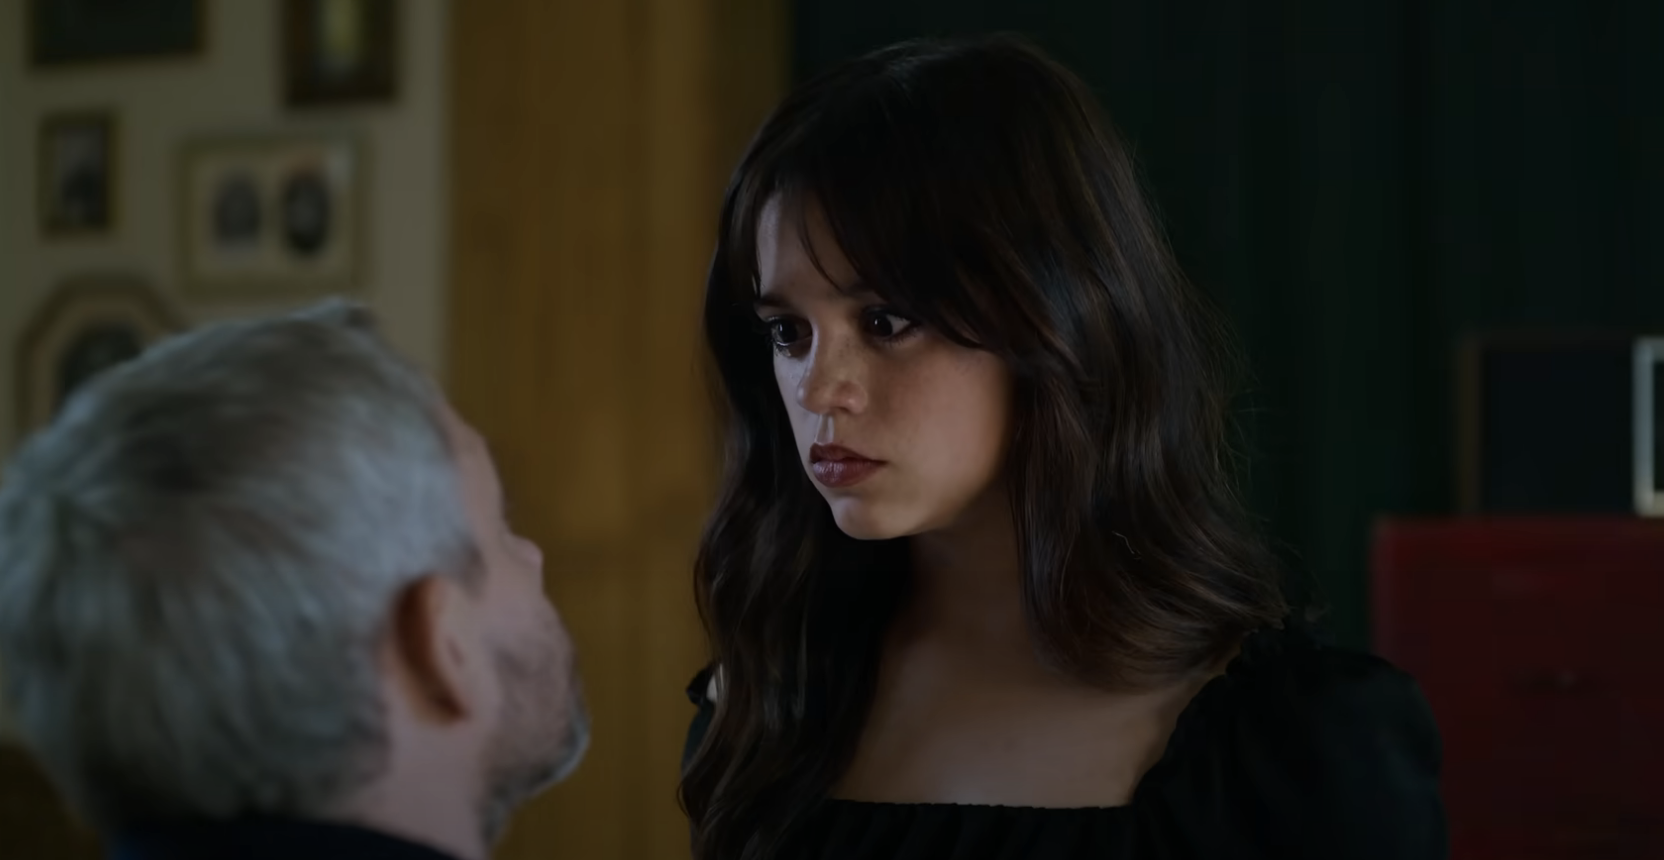 jenna&#x27;s character looking angry at her teacher in the classroom